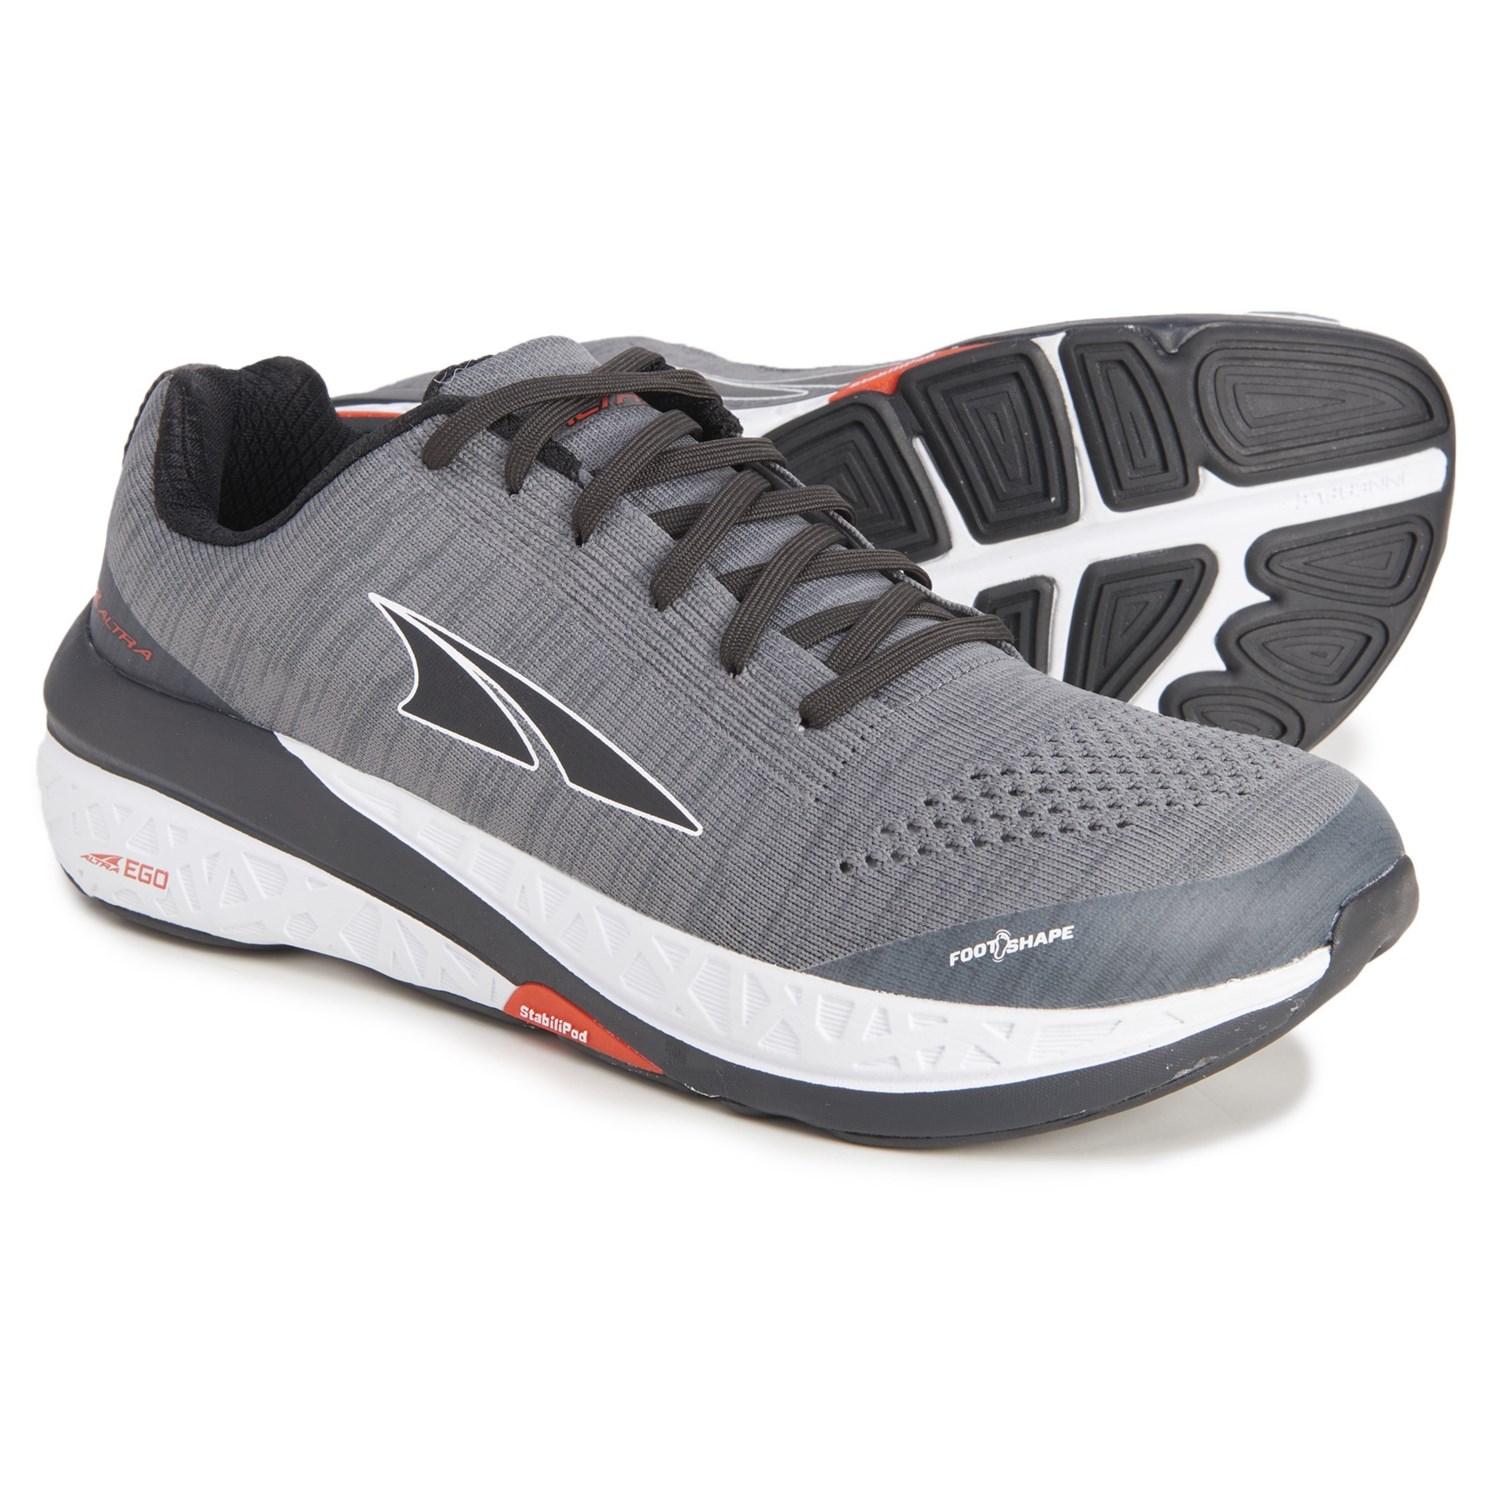 Altra Paradigm 4.5 Running Shoes (For Men) - Save 22%